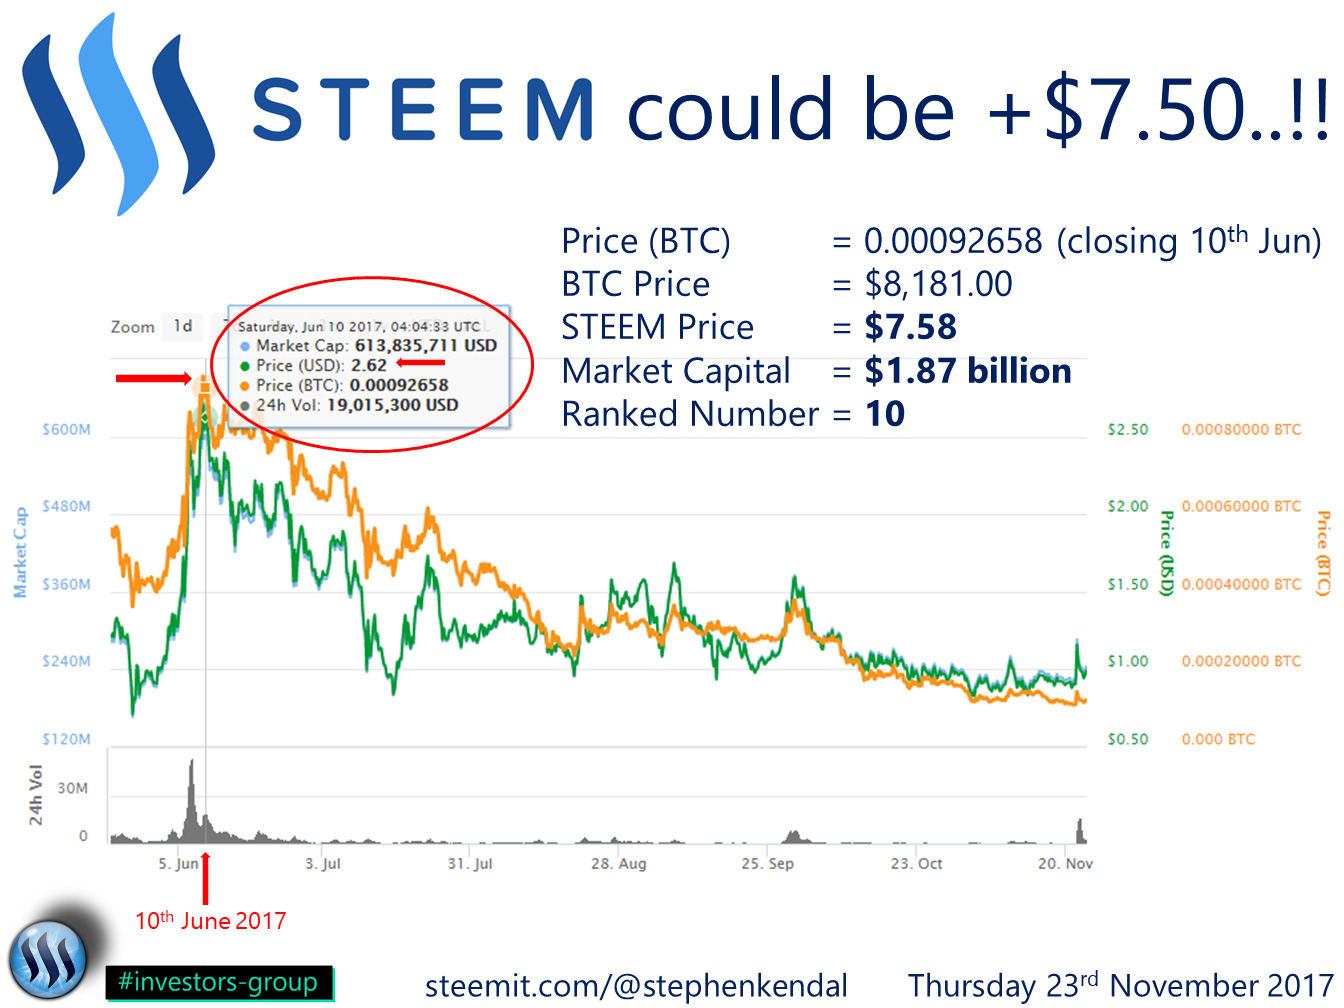 Steem should be + $7.50.png